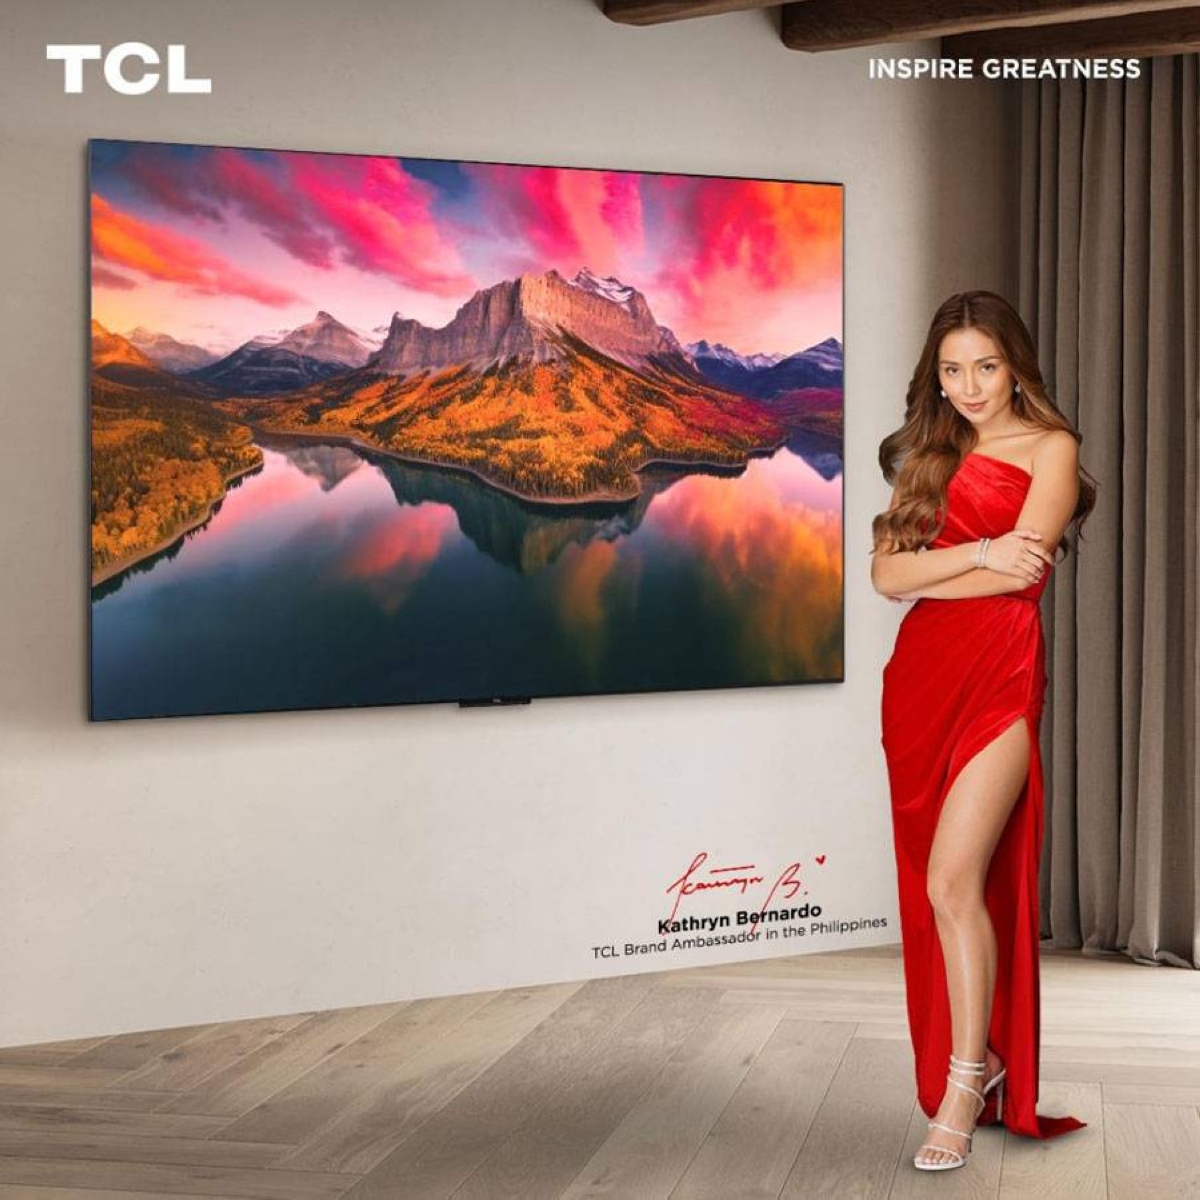 tcl innovates viewing experience with larger screens